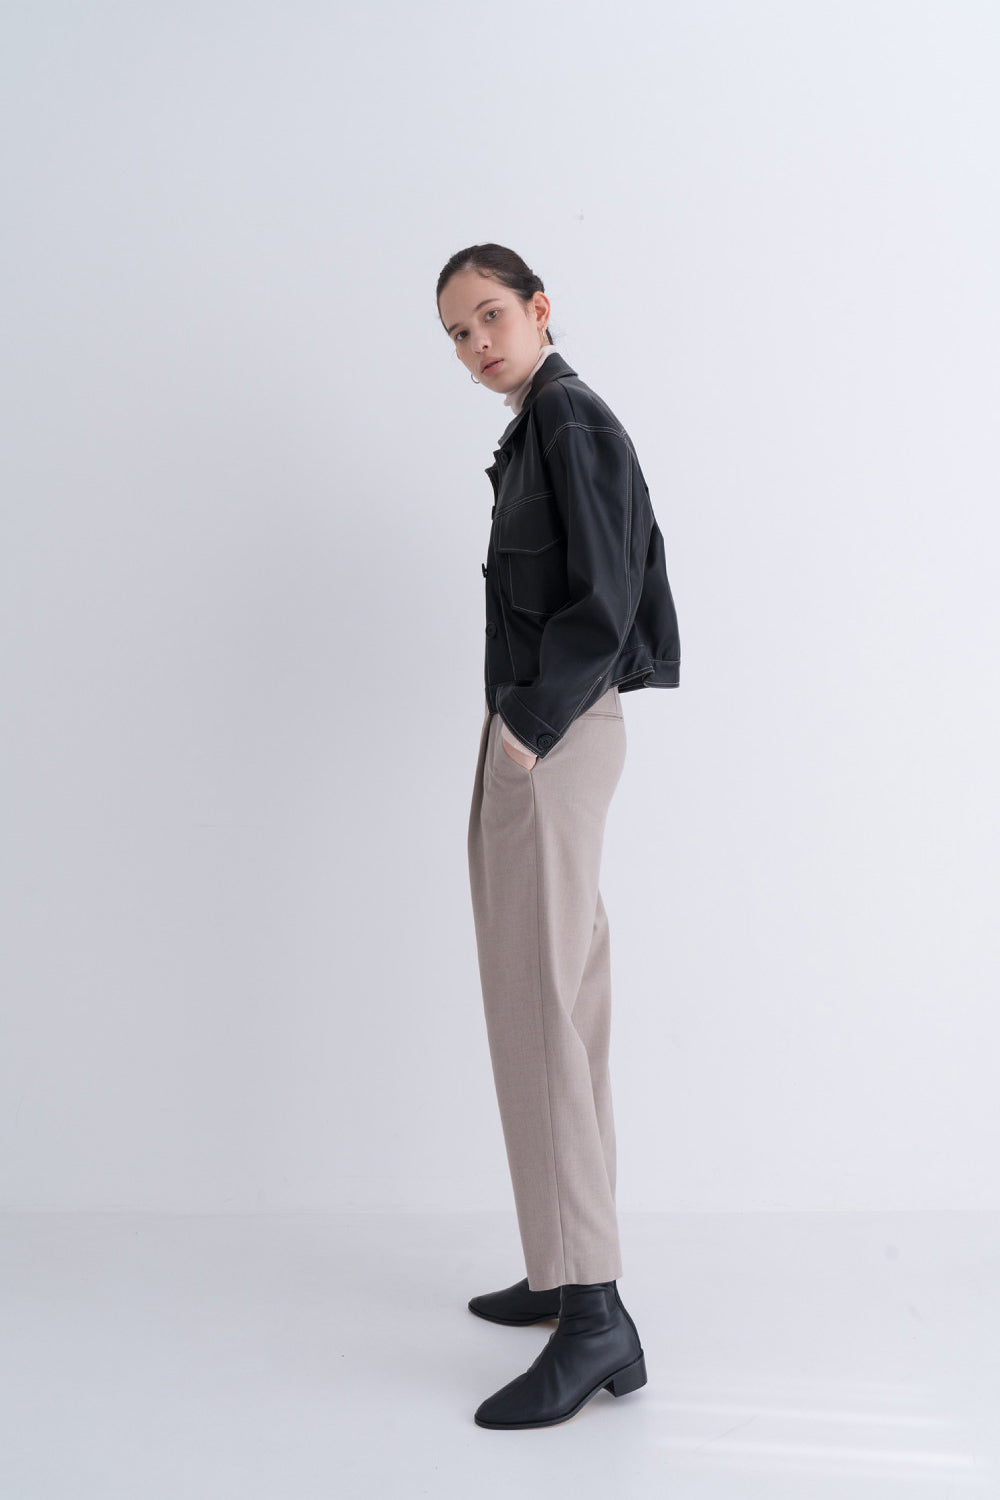 NOTA Comfy Pintuck Wool Pants Oatmeal Modest Ladies Loose Long Trousers with Pockets in Beige